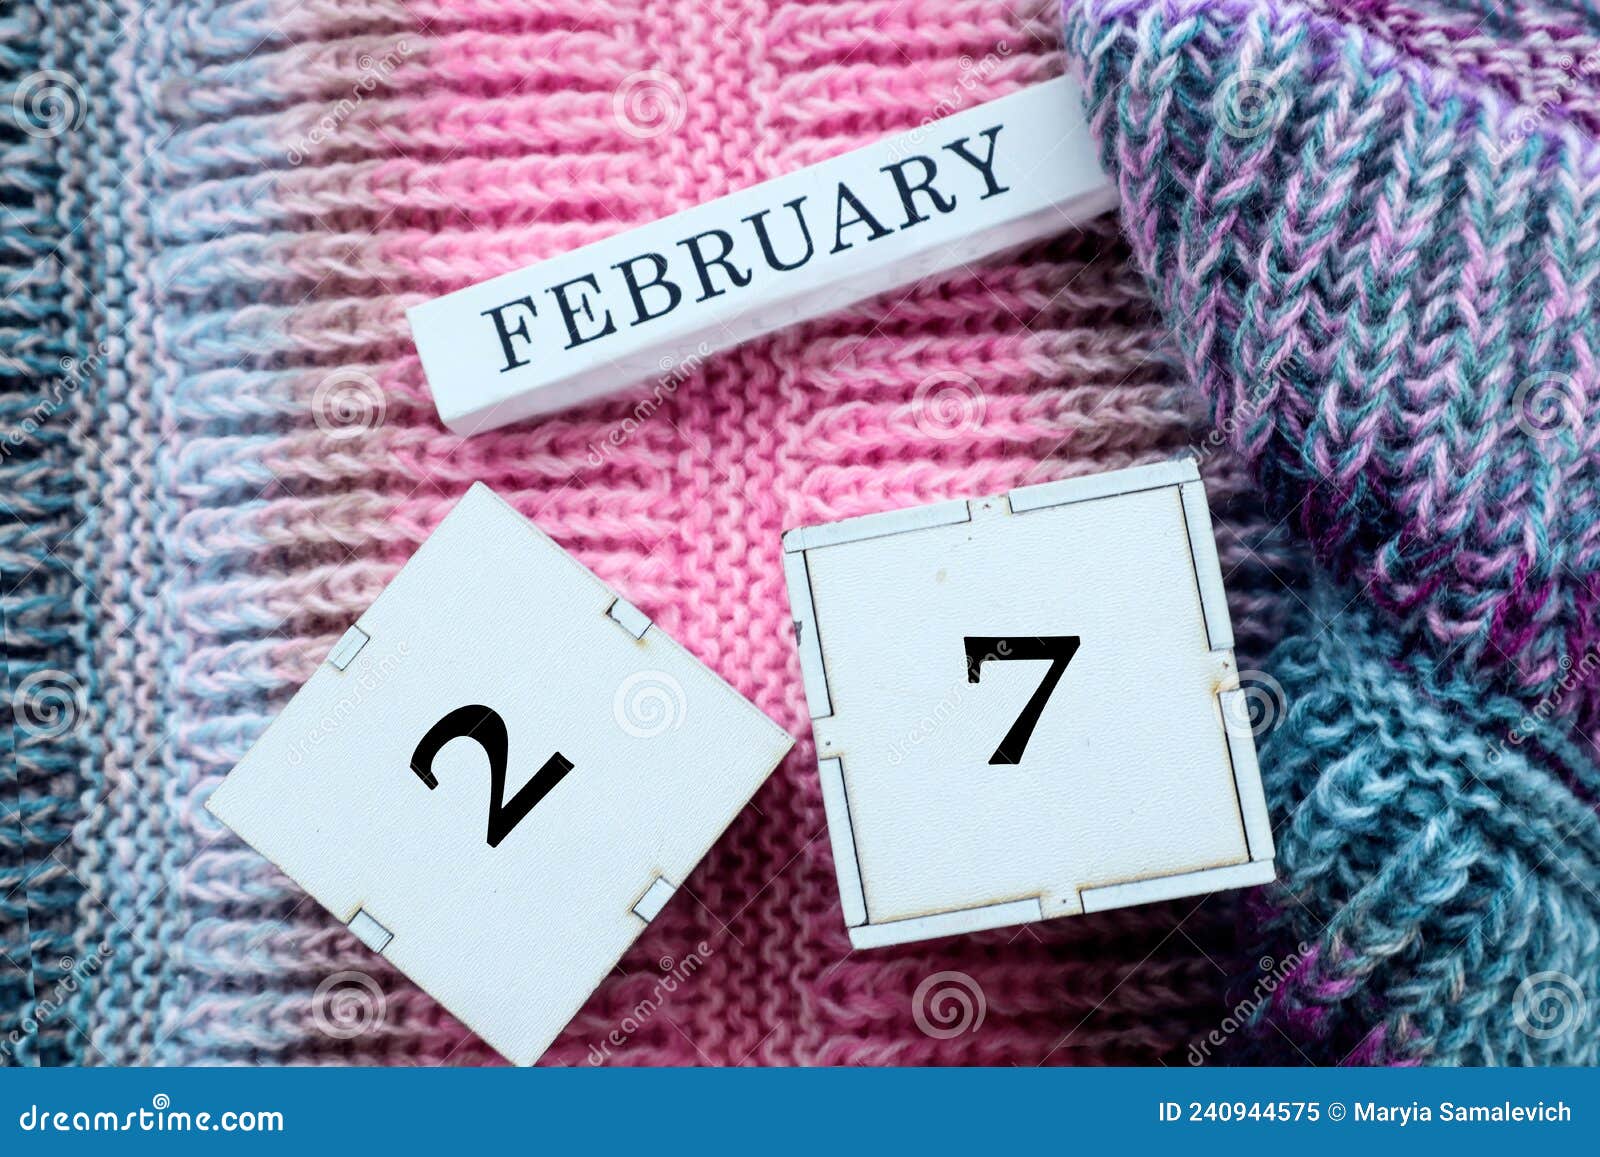 calendar for february 27: cubes with the numbers 27, the name of the month of february in english on multi-colored jersey, top